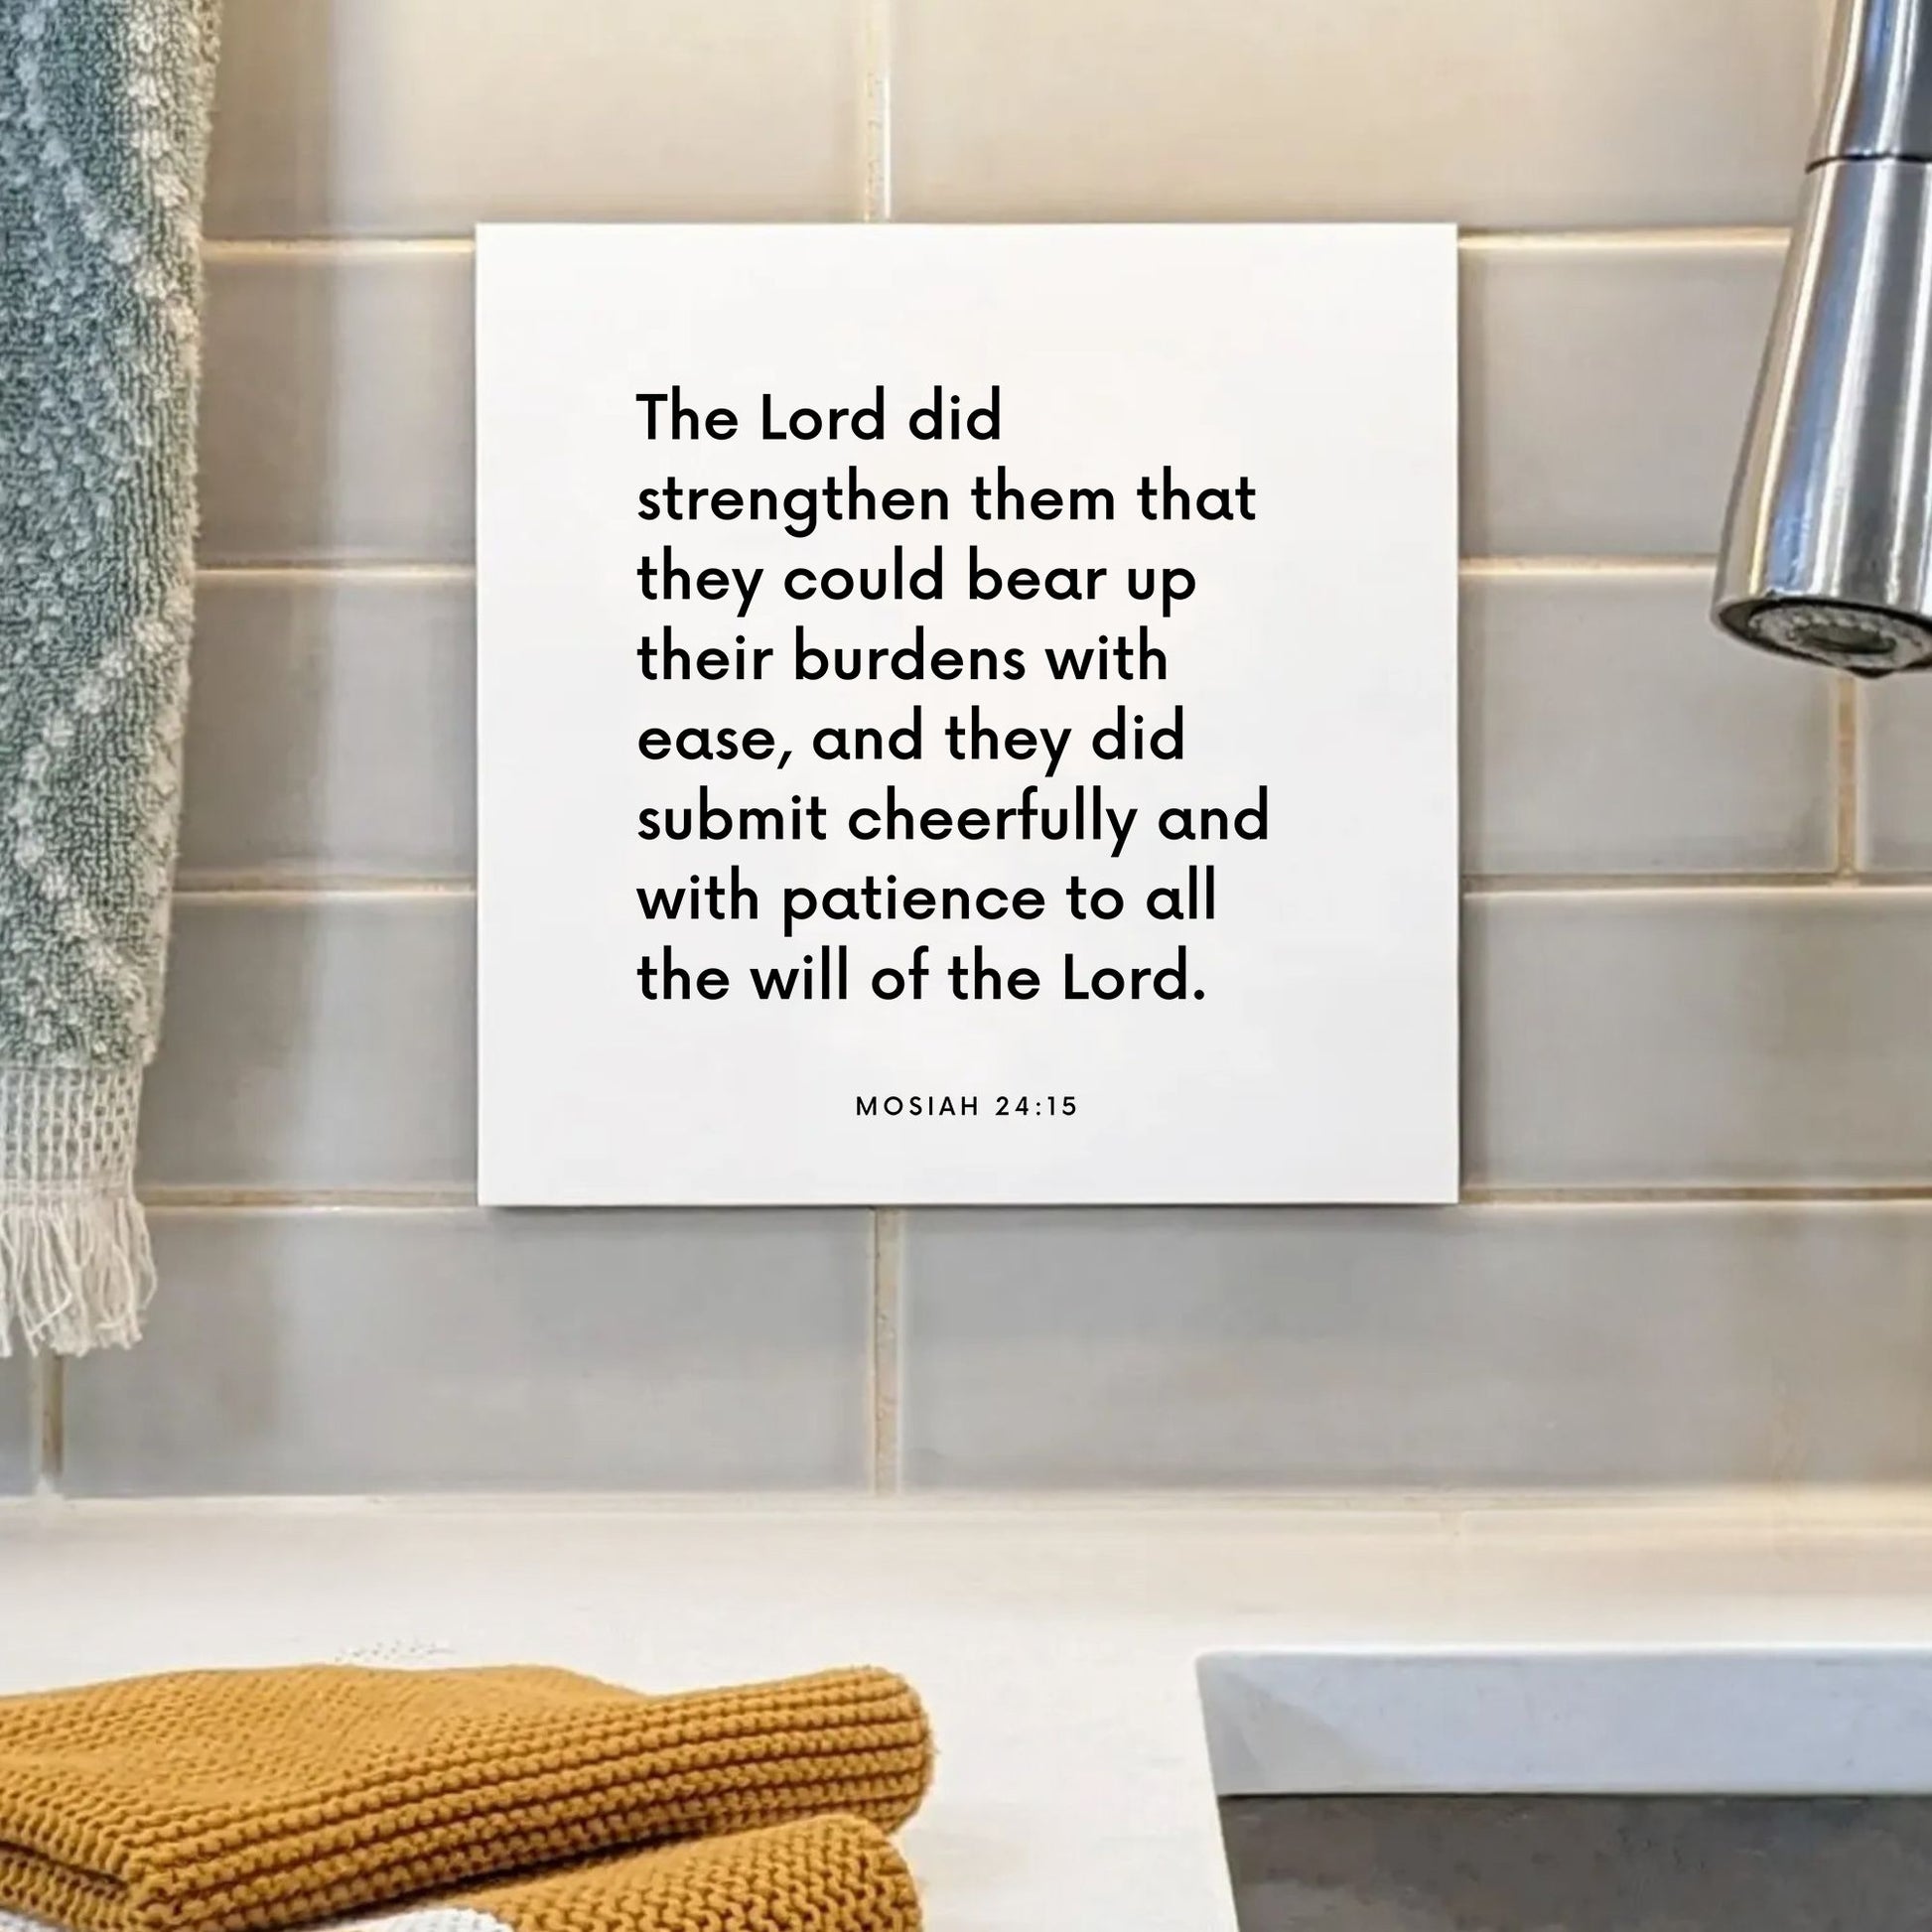 Sink mouting of the scripture tile for Mosiah 24:15 - "They did submit cheerfully and with patience"